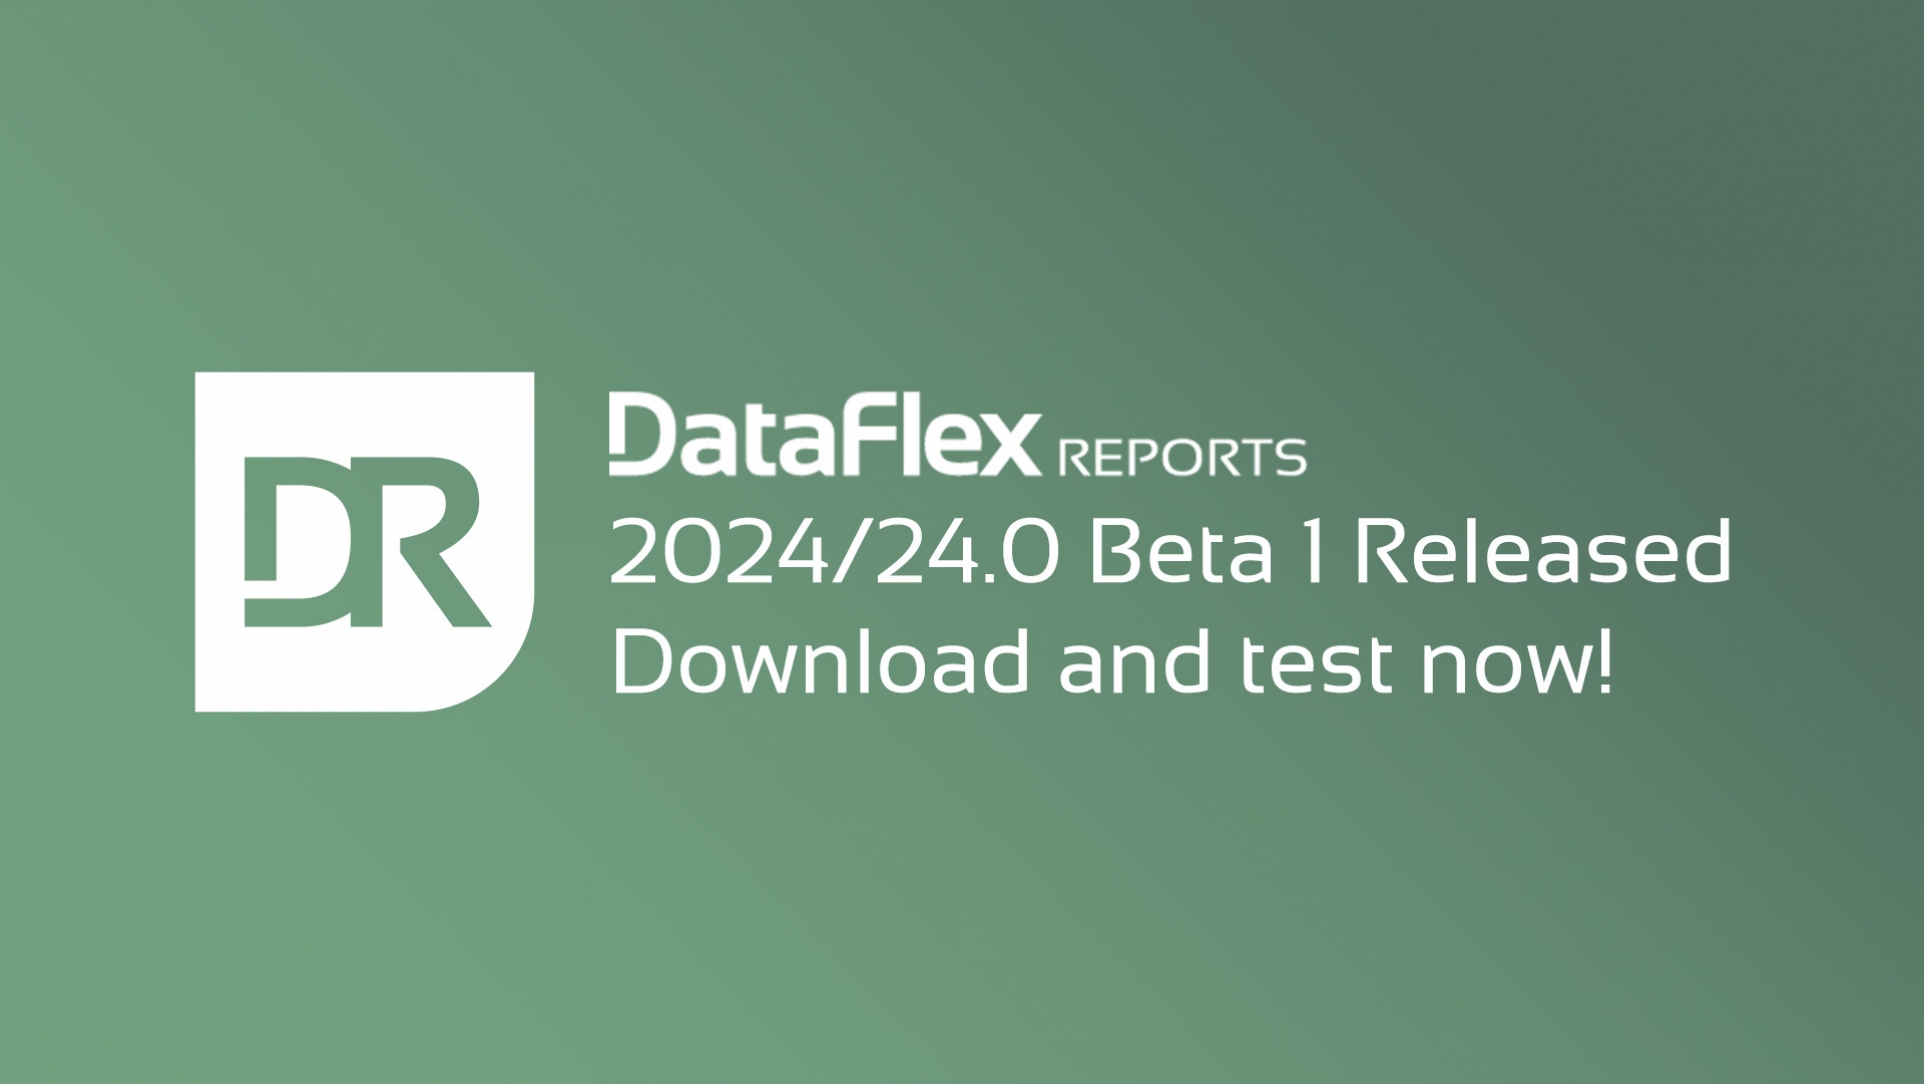 Download and test DataFlex Reports 2024 Beta 1!